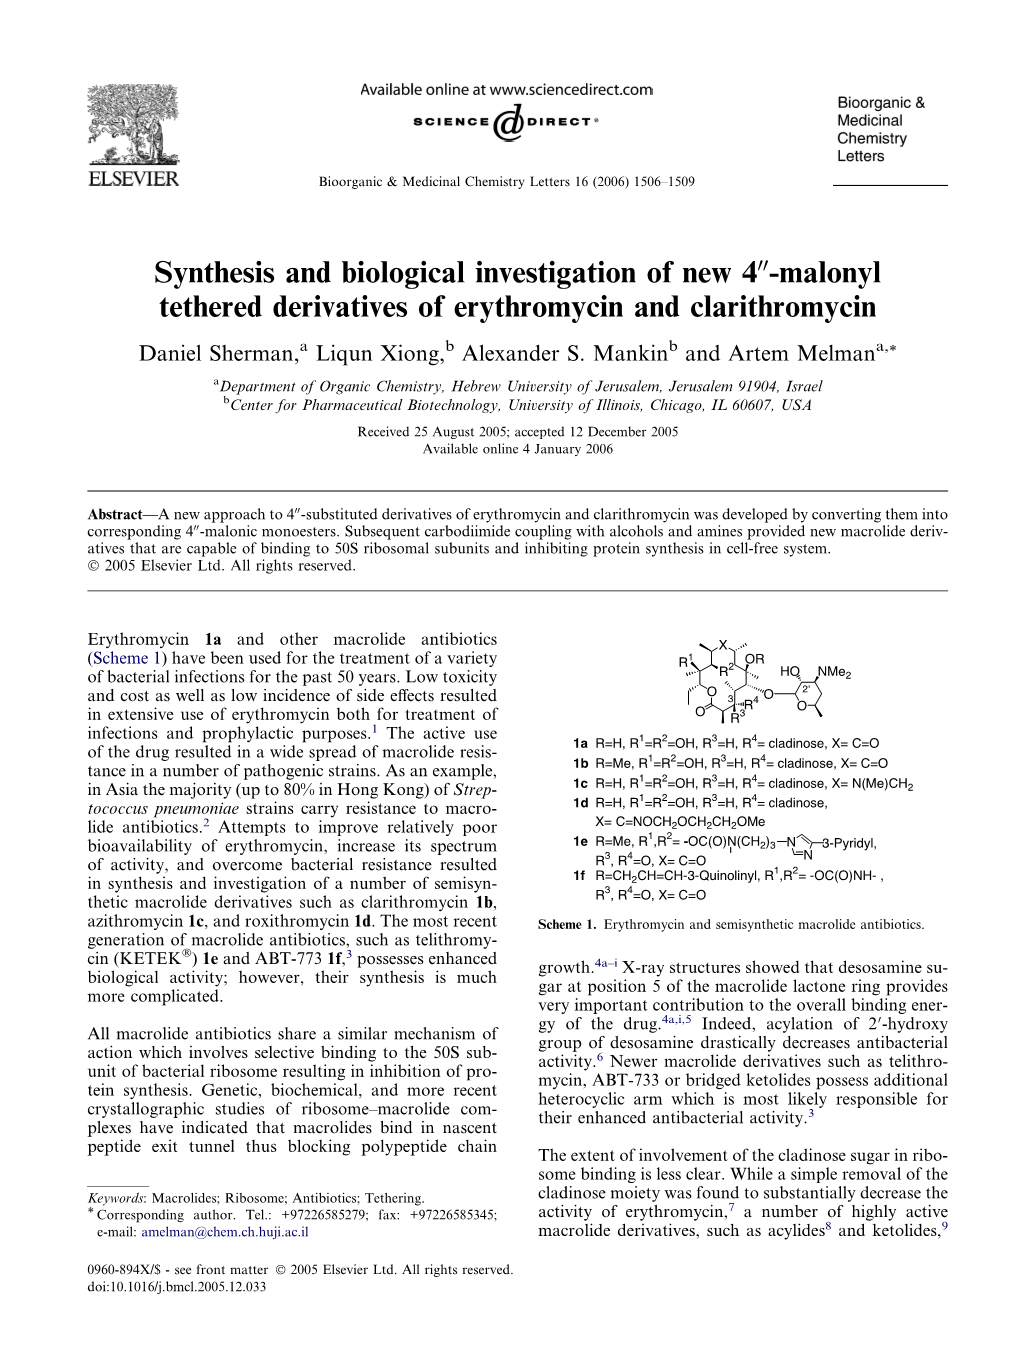 Synthesis and Biological Investigation of New 400-Malonyl Tethered Derivatives of Erythromycin and Clarithromycin Daniel Sherman,A Liqun Xiong,B Alexander S